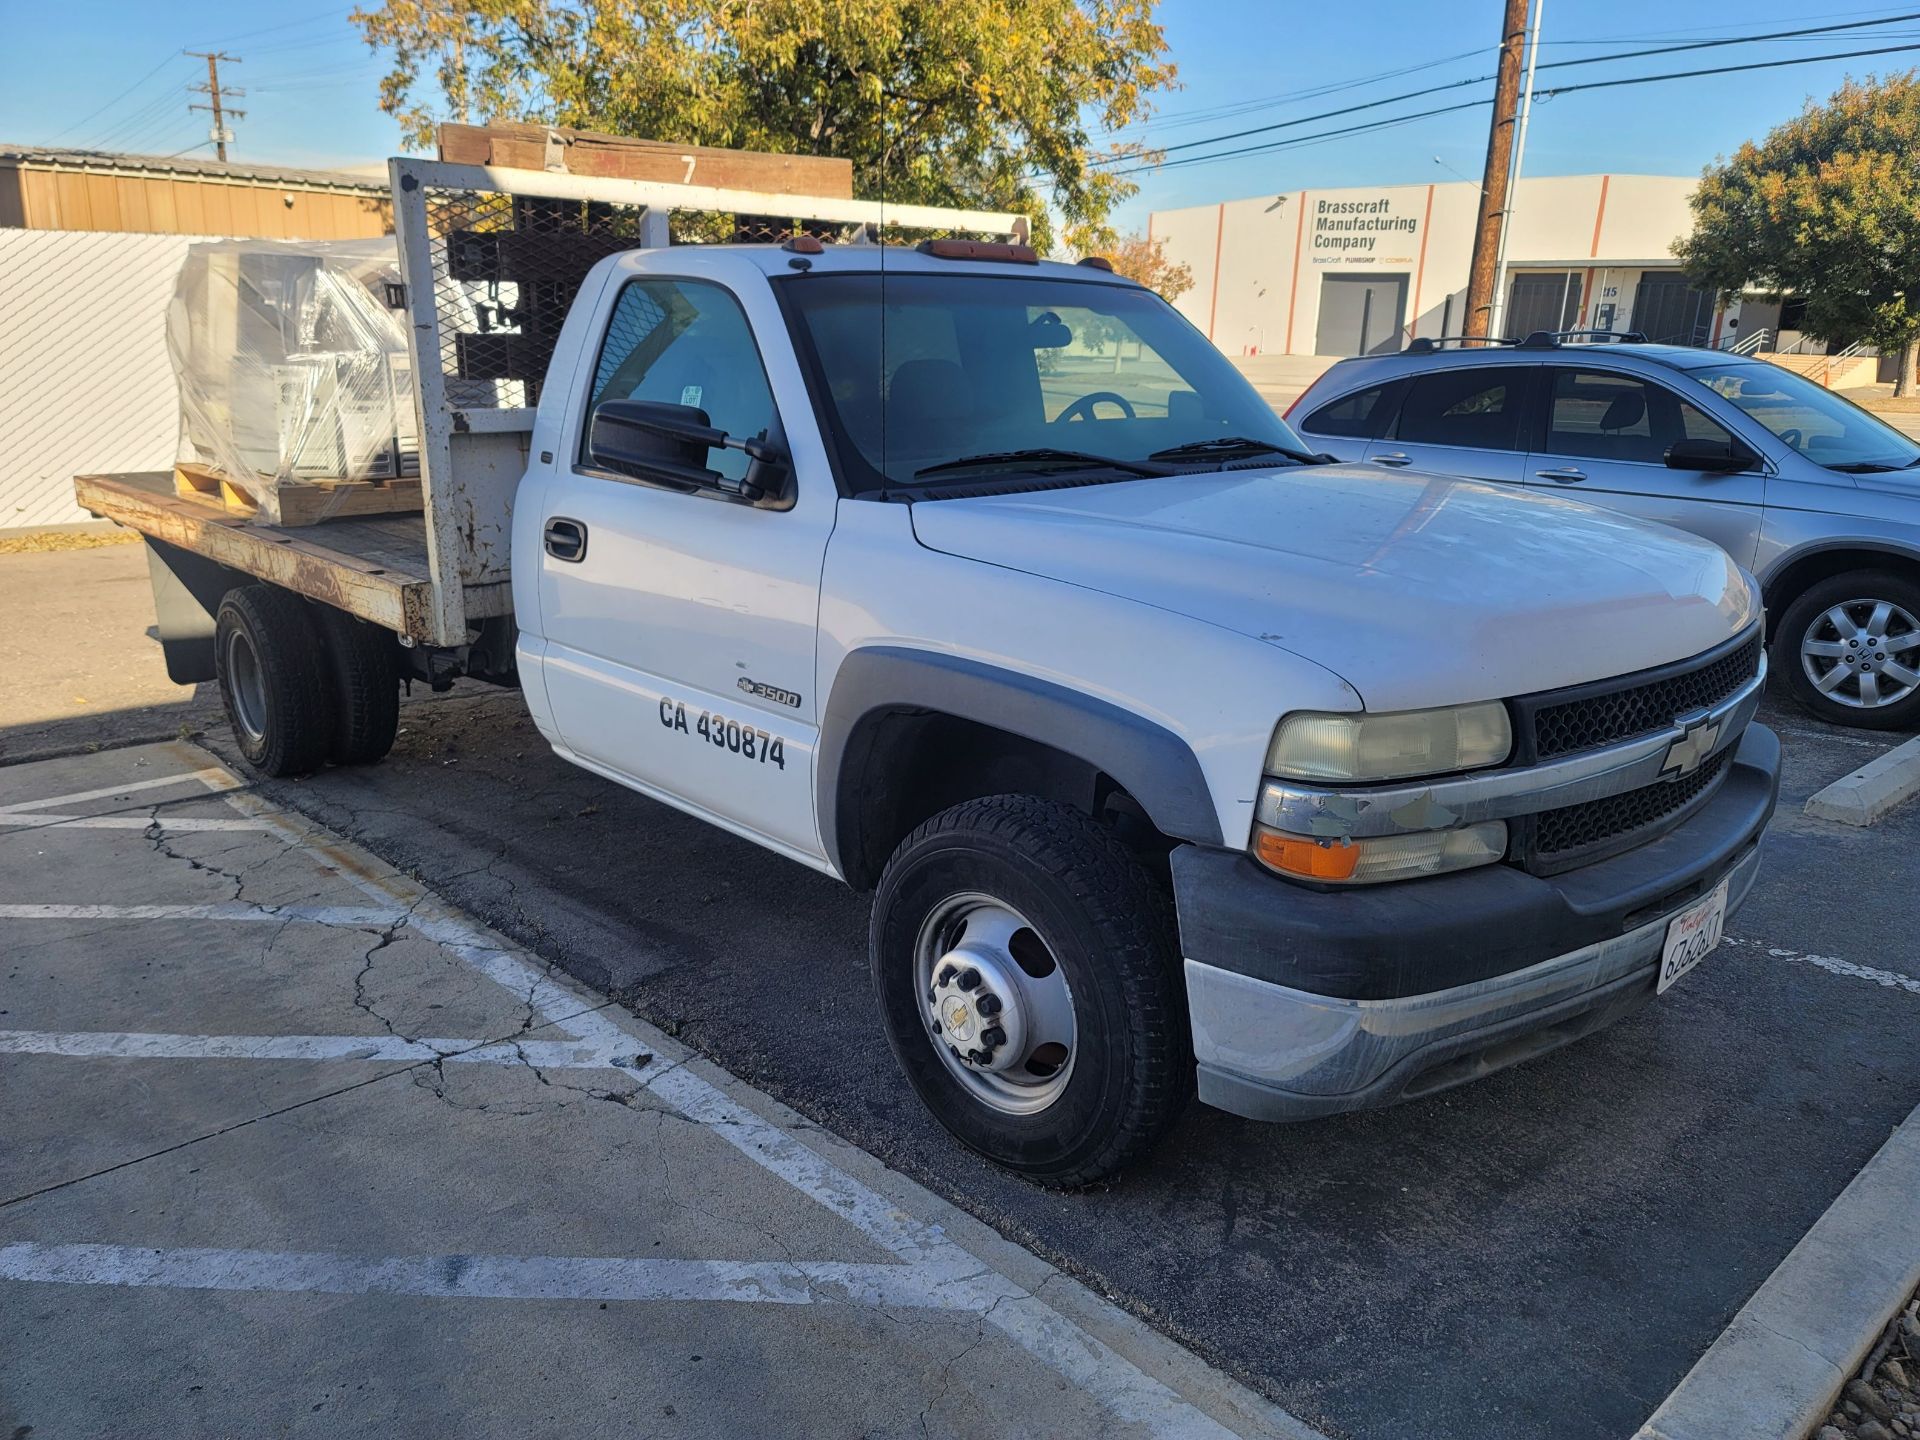 2002 CHEVROLET 3500 SILVERADO 12' STAKE BED TRUCK, MISSING CATALYTIC CONVERTER AND DRIVER SIDE